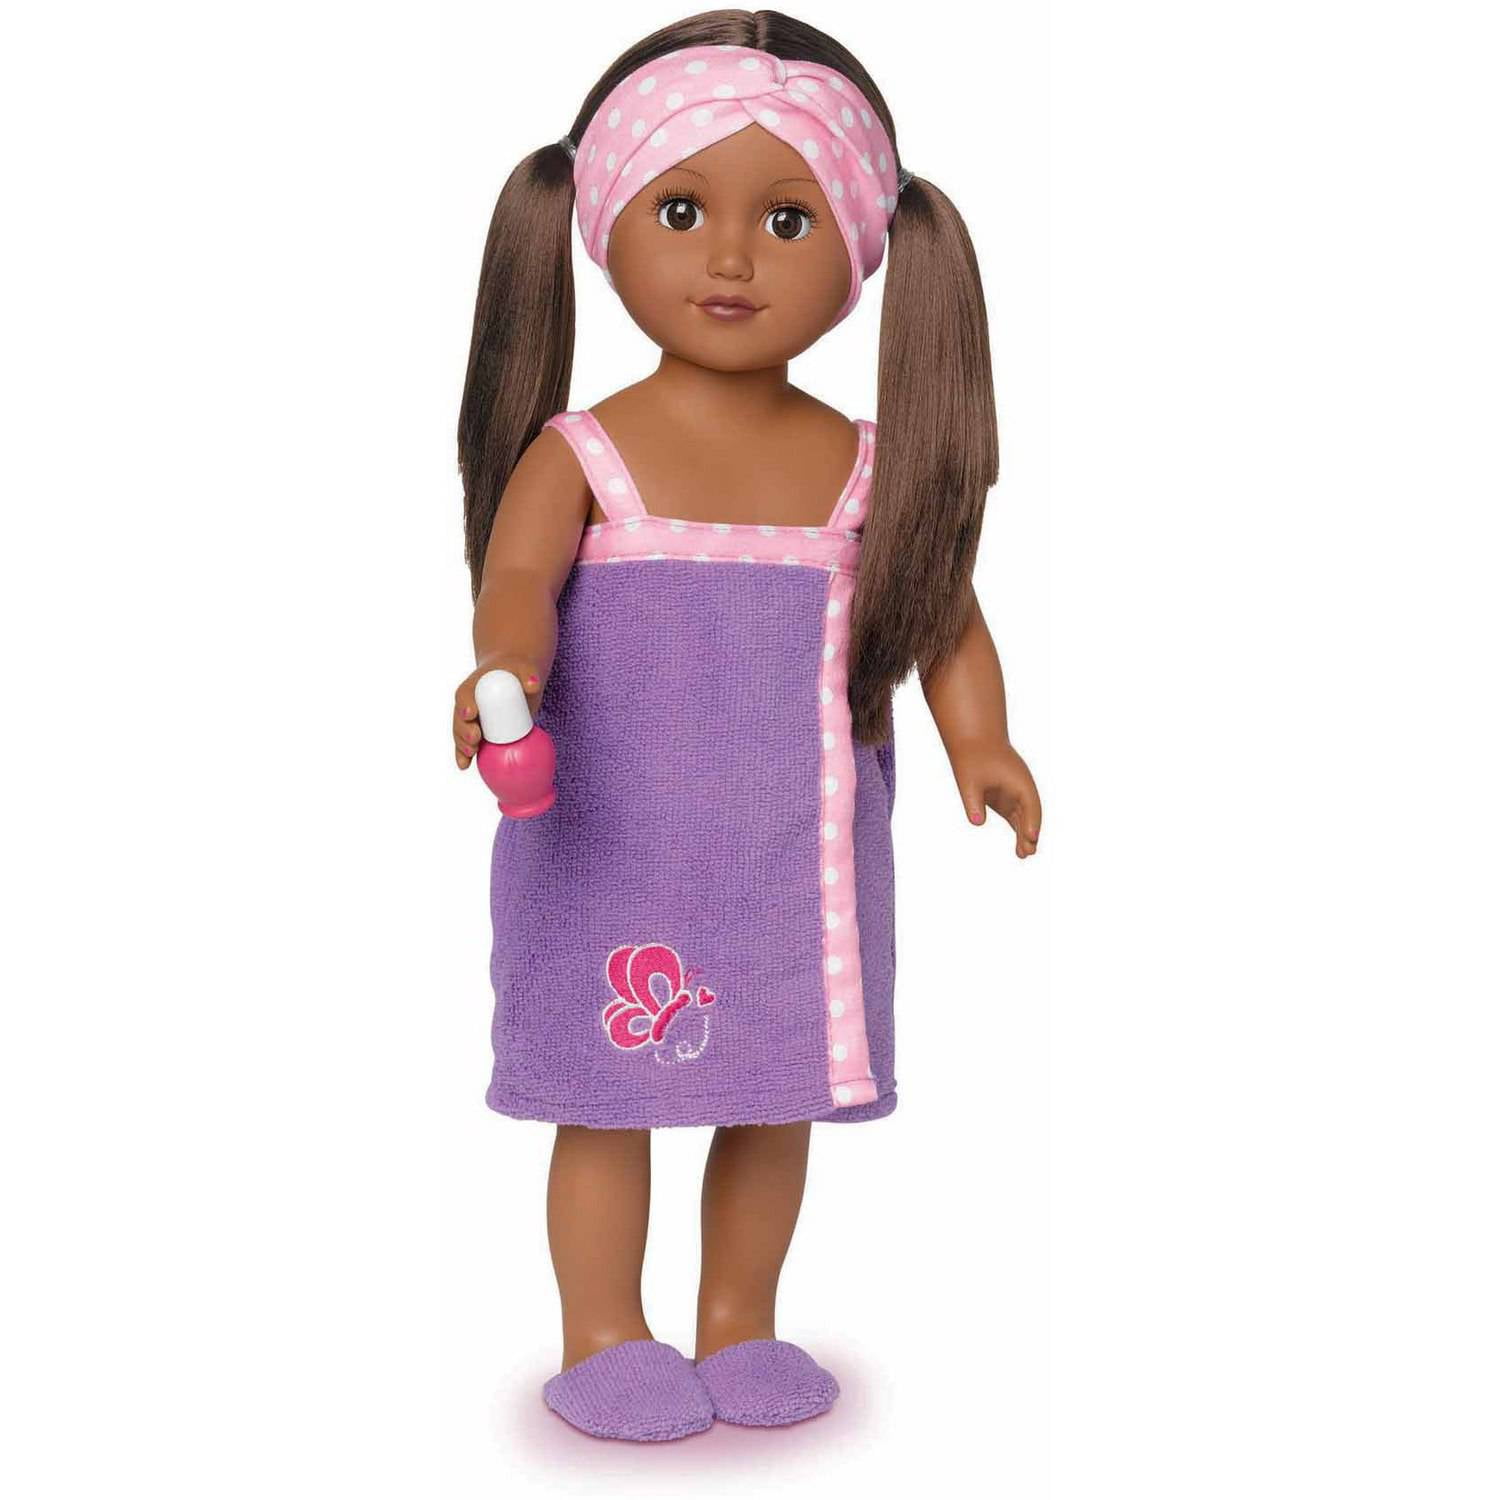 My Life As Spa Vacationer 18 Inch Posable Doll African American Walmart Inventory Checker